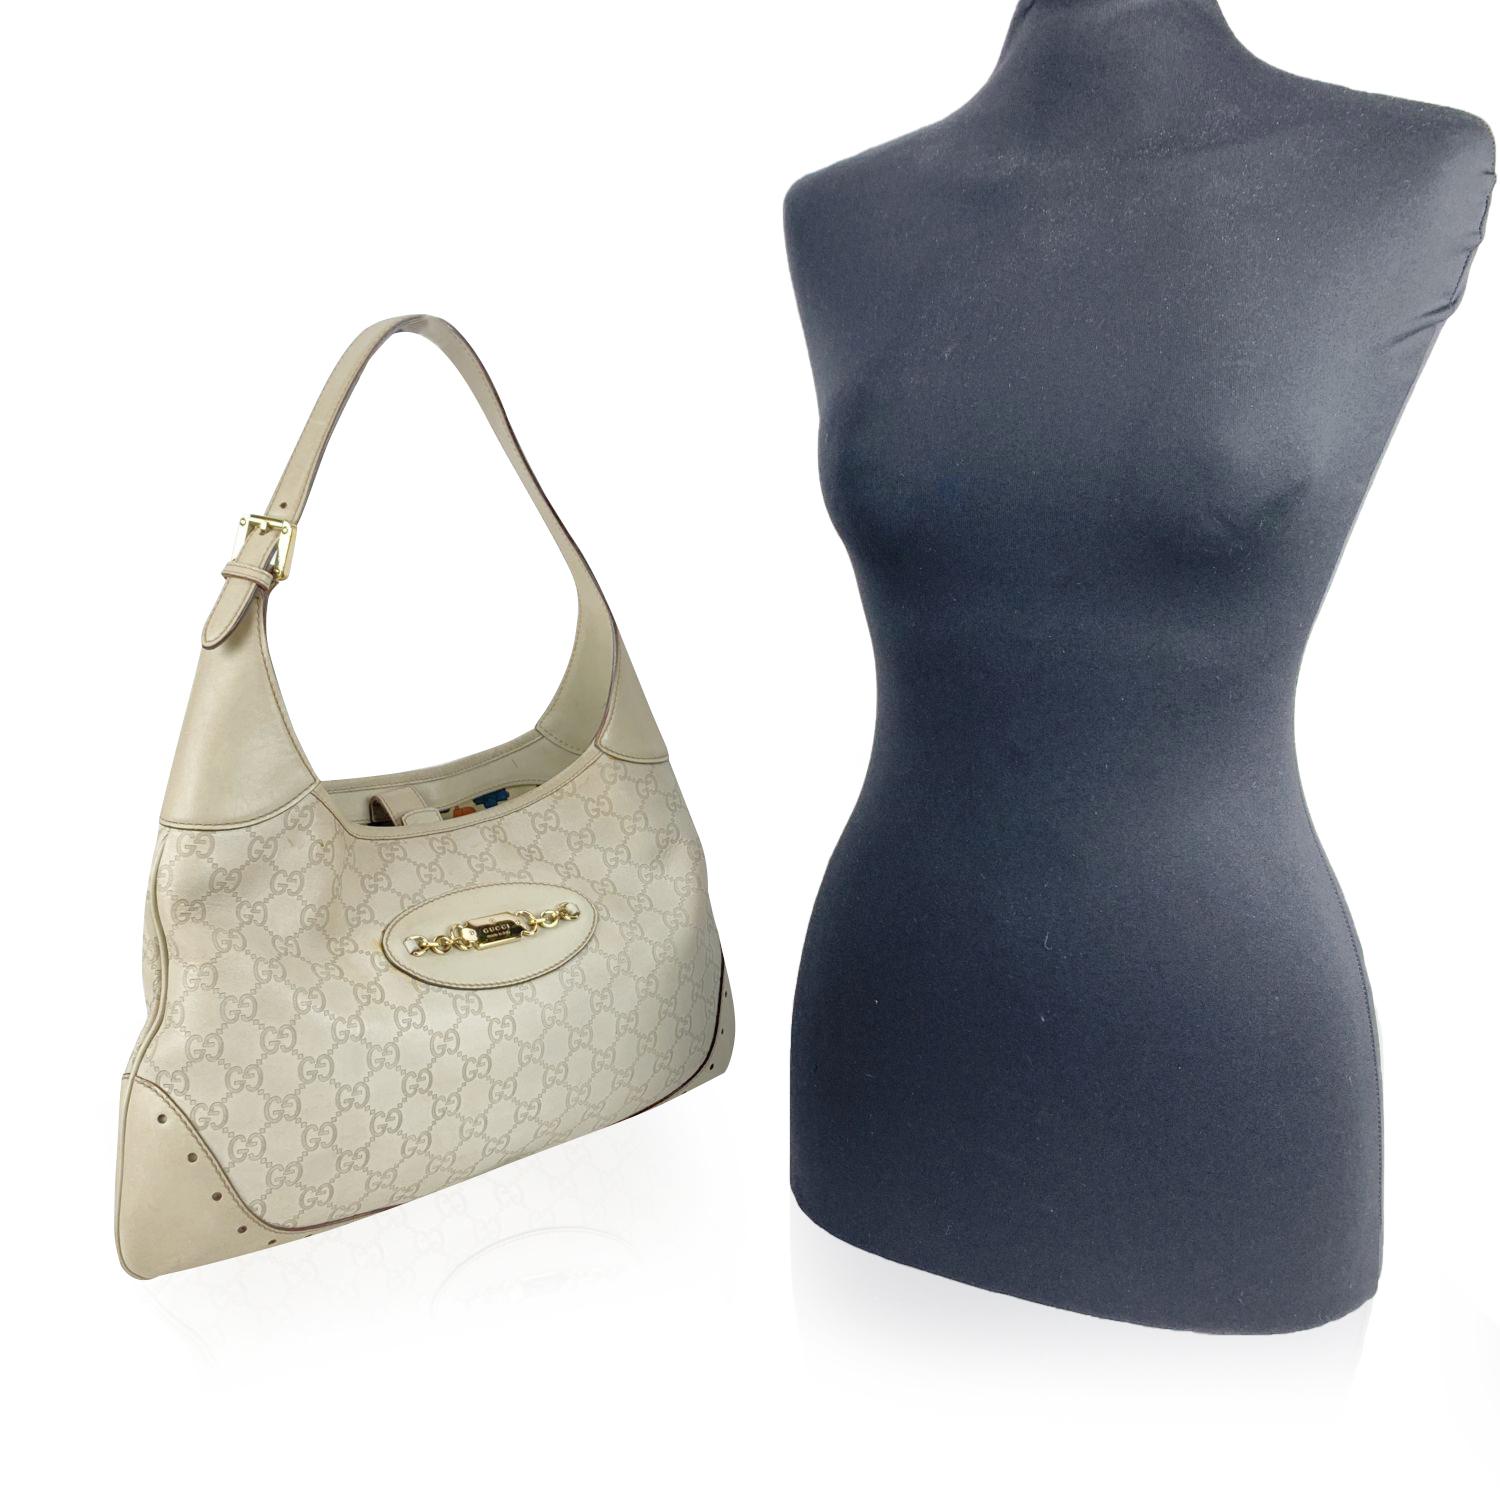 Gucci 'Jackie o Bouvier Punch' hobo bag. Crafted from off-white Guccissima leather. Light gold Gucci logo plate on the front. Single leather shoulder strap. Strap closure internally. Horsebit canvas lining. 1 interior zip pocket. GUCCI - Made in